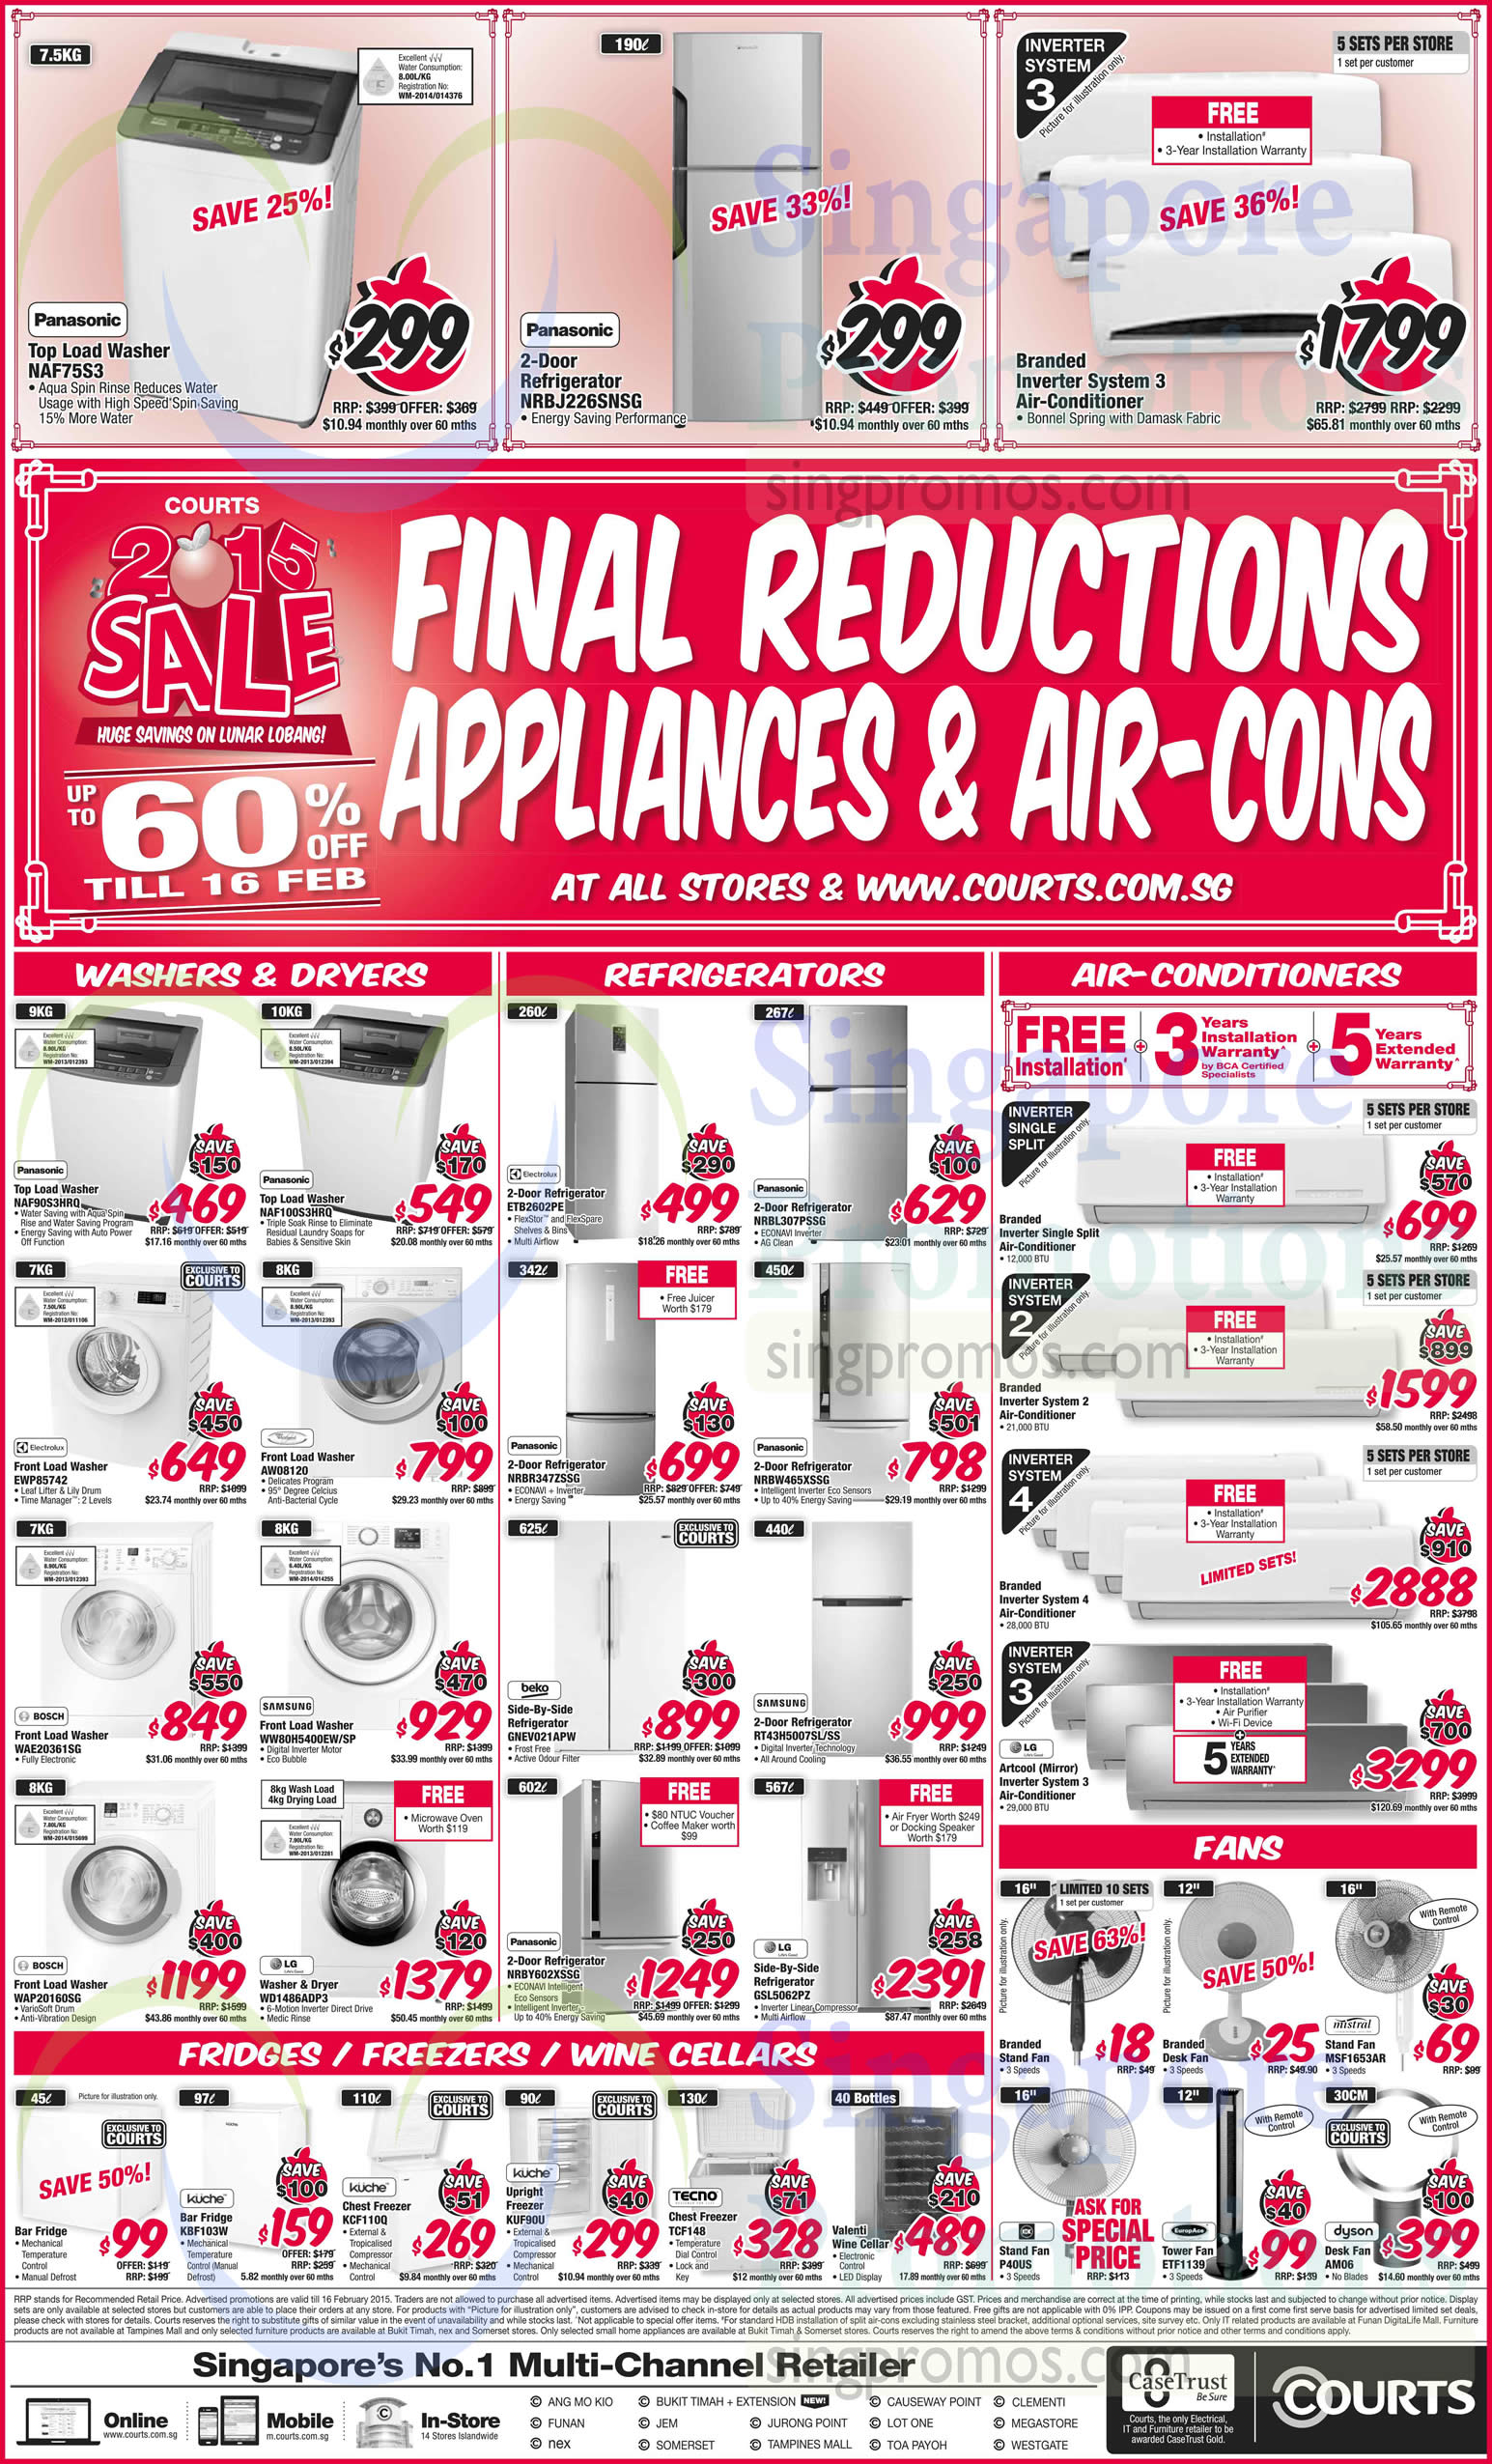 Featured image for Courts Lunar Lobang Final Reductions Offers 14 - 16 Feb 2015